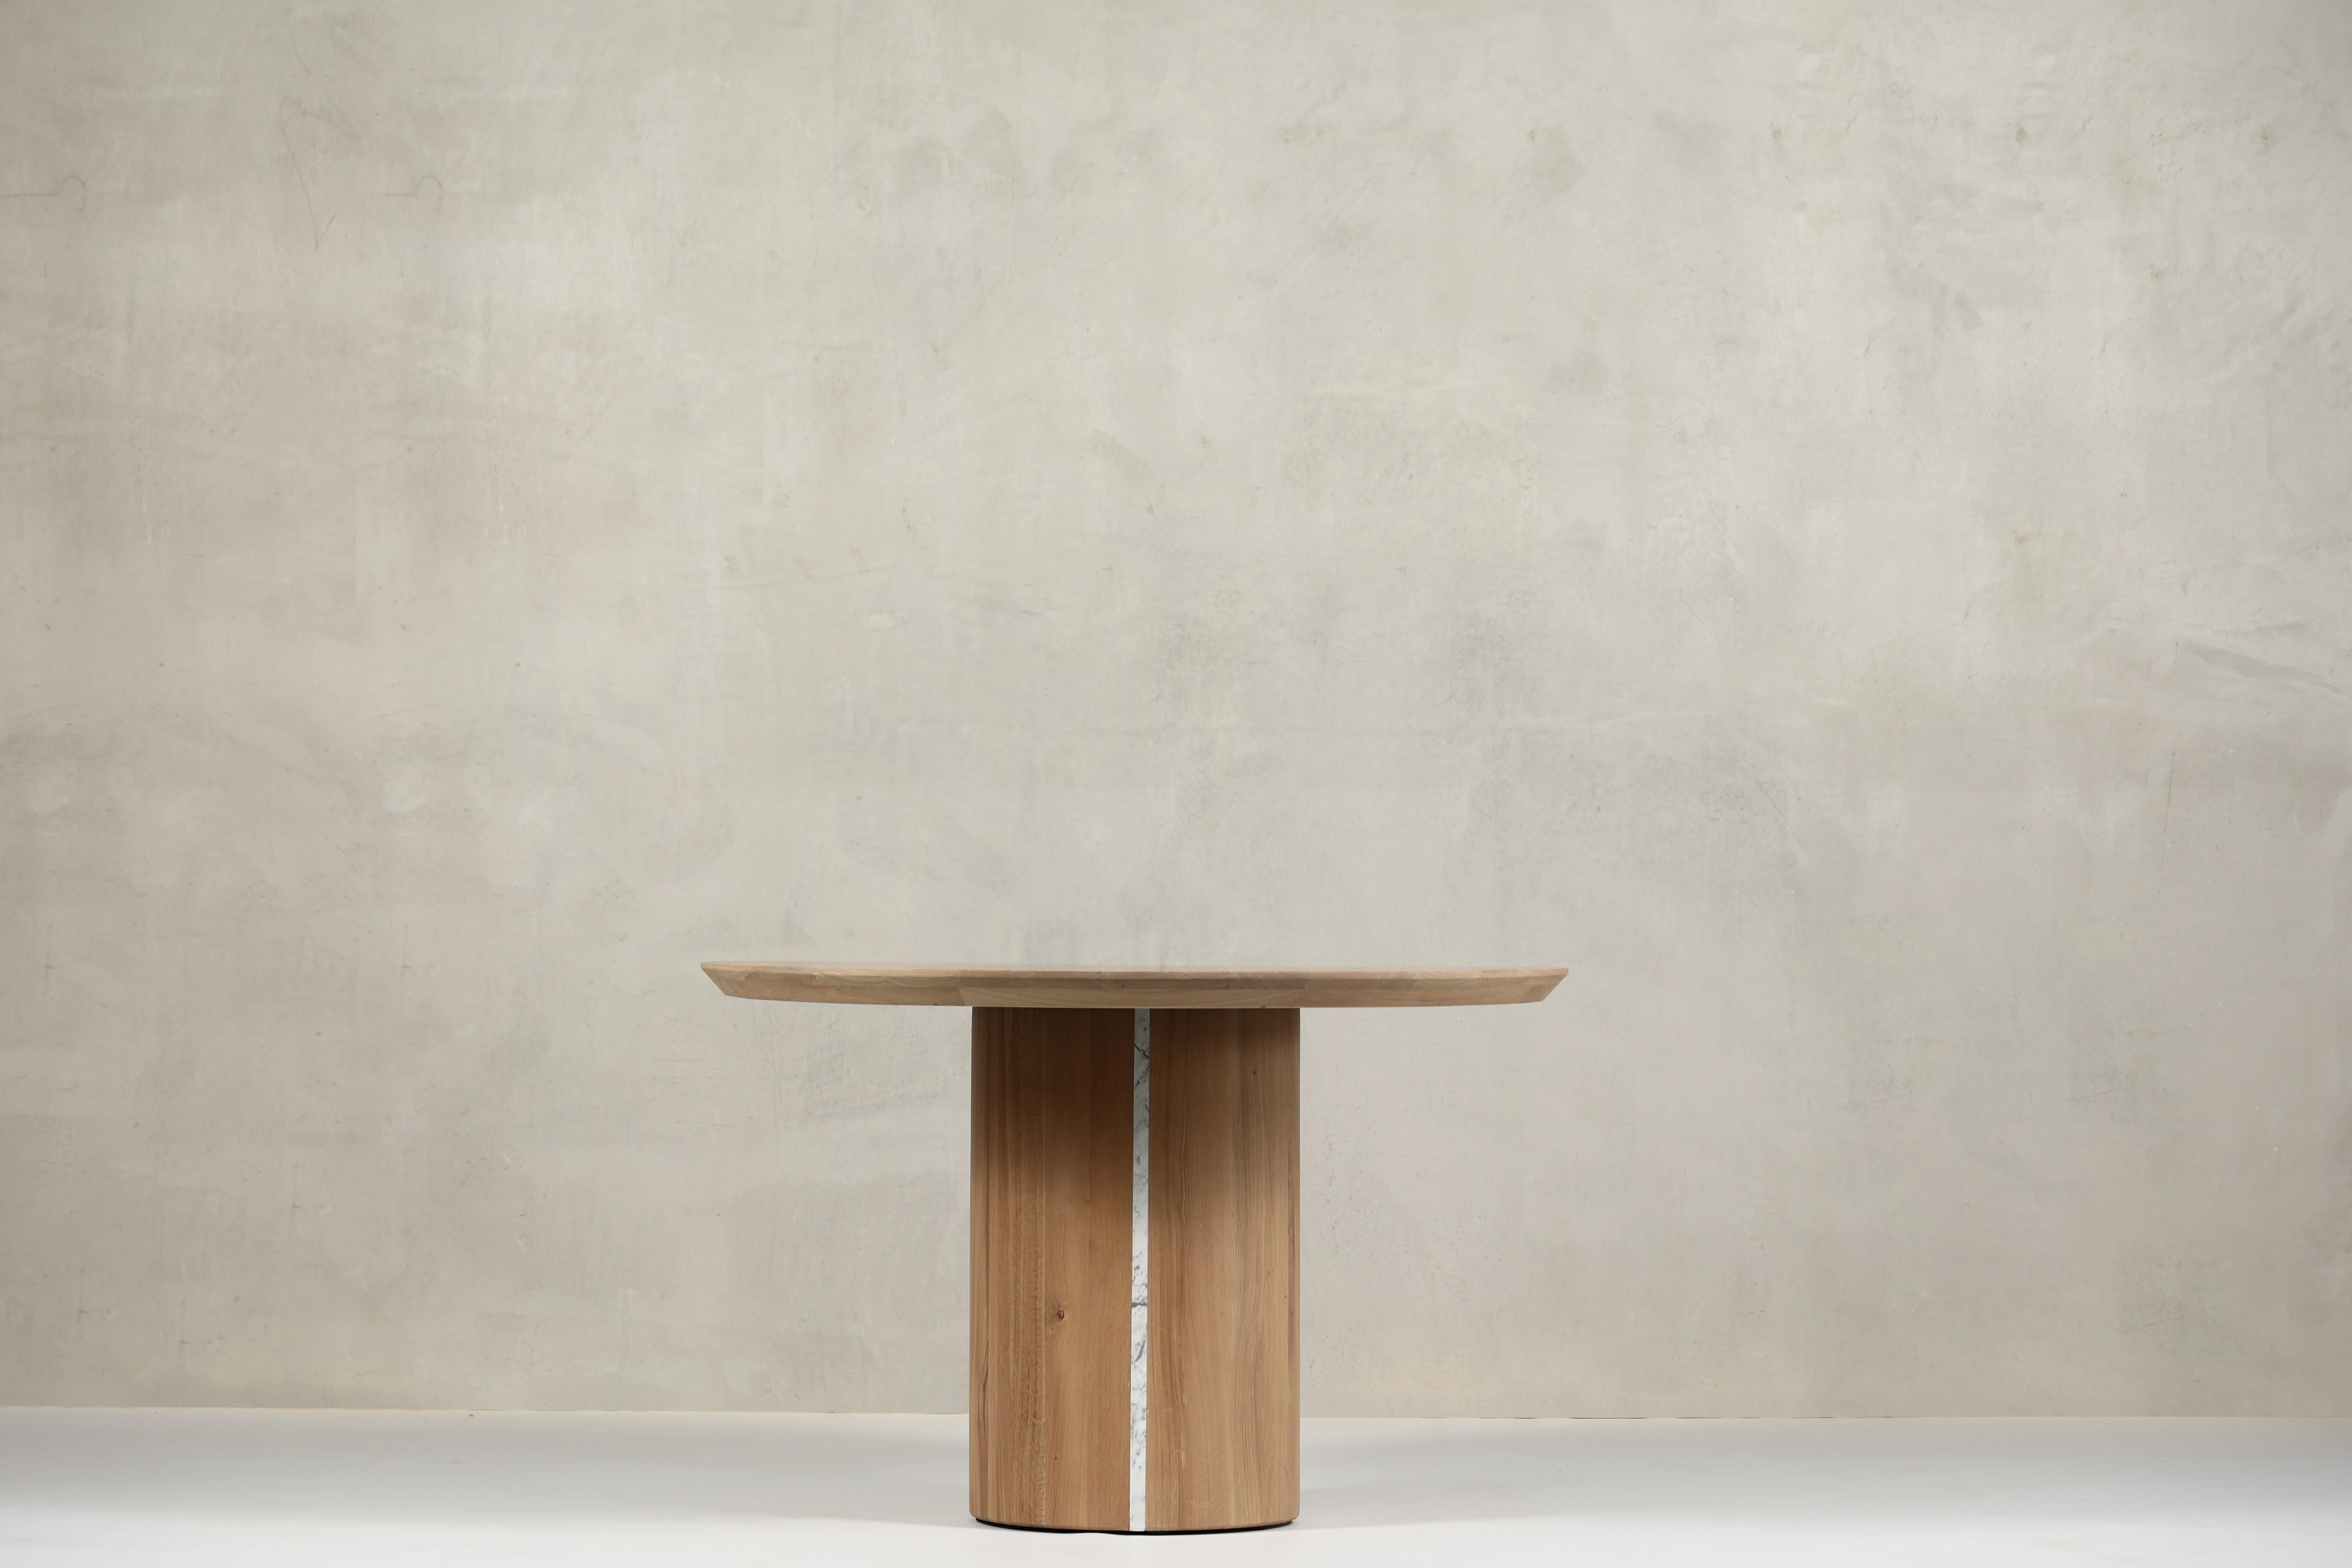 Scar is a dining or meeting table that works in different areas such as HoReCa, Residential or Offices.
 
The leg of the table is the Genesis from which the rest of the collection starts, this massive oak column is divided into 2 marble - a theme